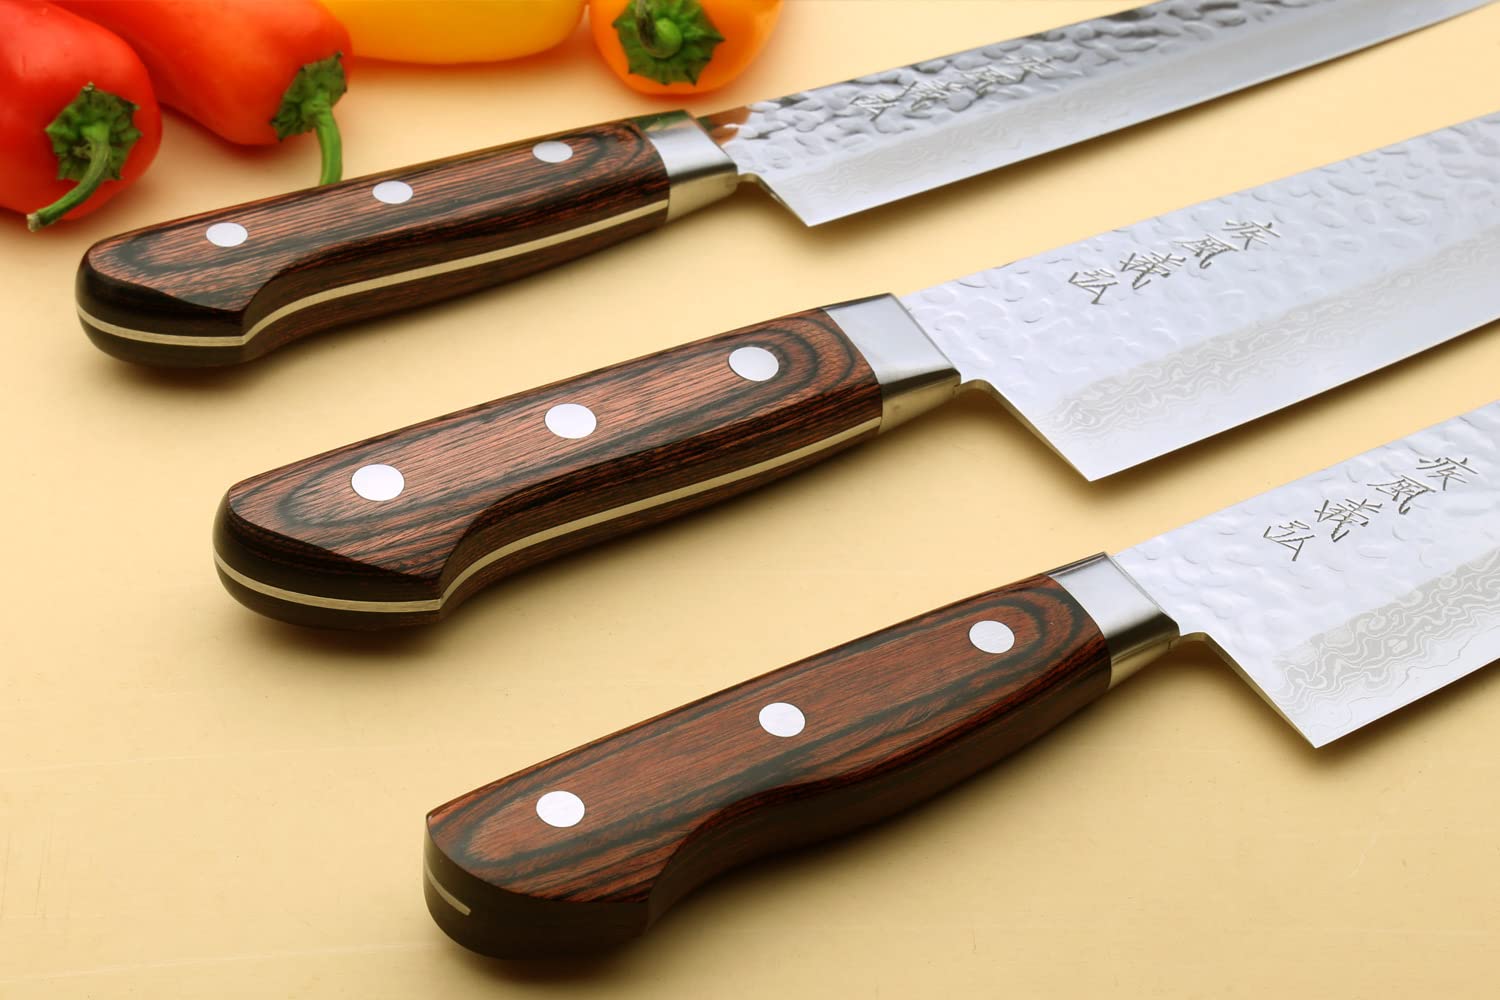 Yoshihiro VG-10 16 Layer Hammered Damascus Stainless Steel Chef Knife 6pc Set - MADE IN JAPAN